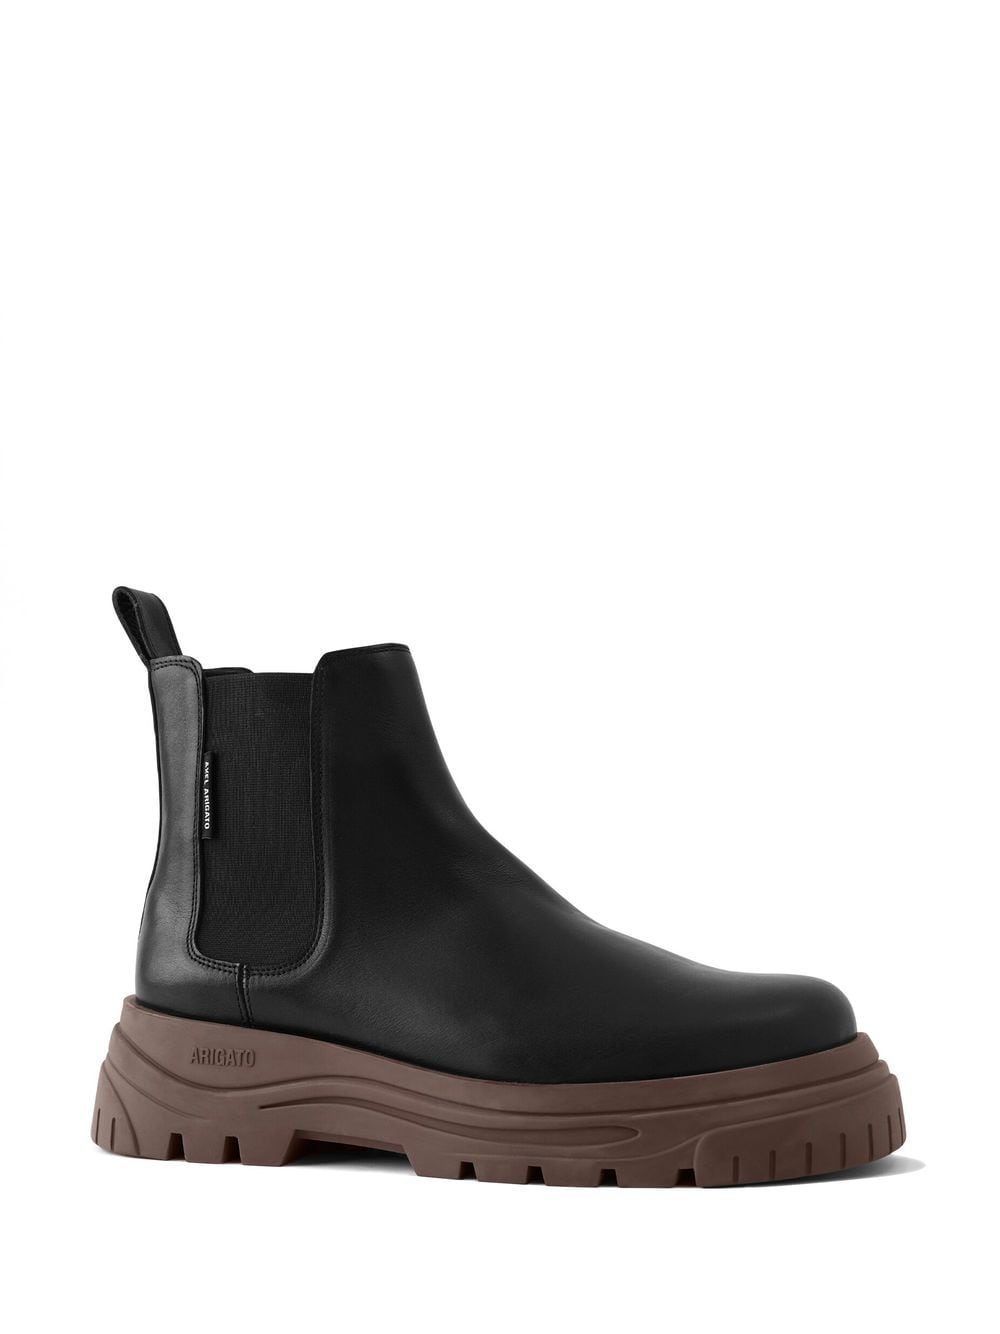 Axel Arigato Blyde Leather Chelsea Boots - Farfetch